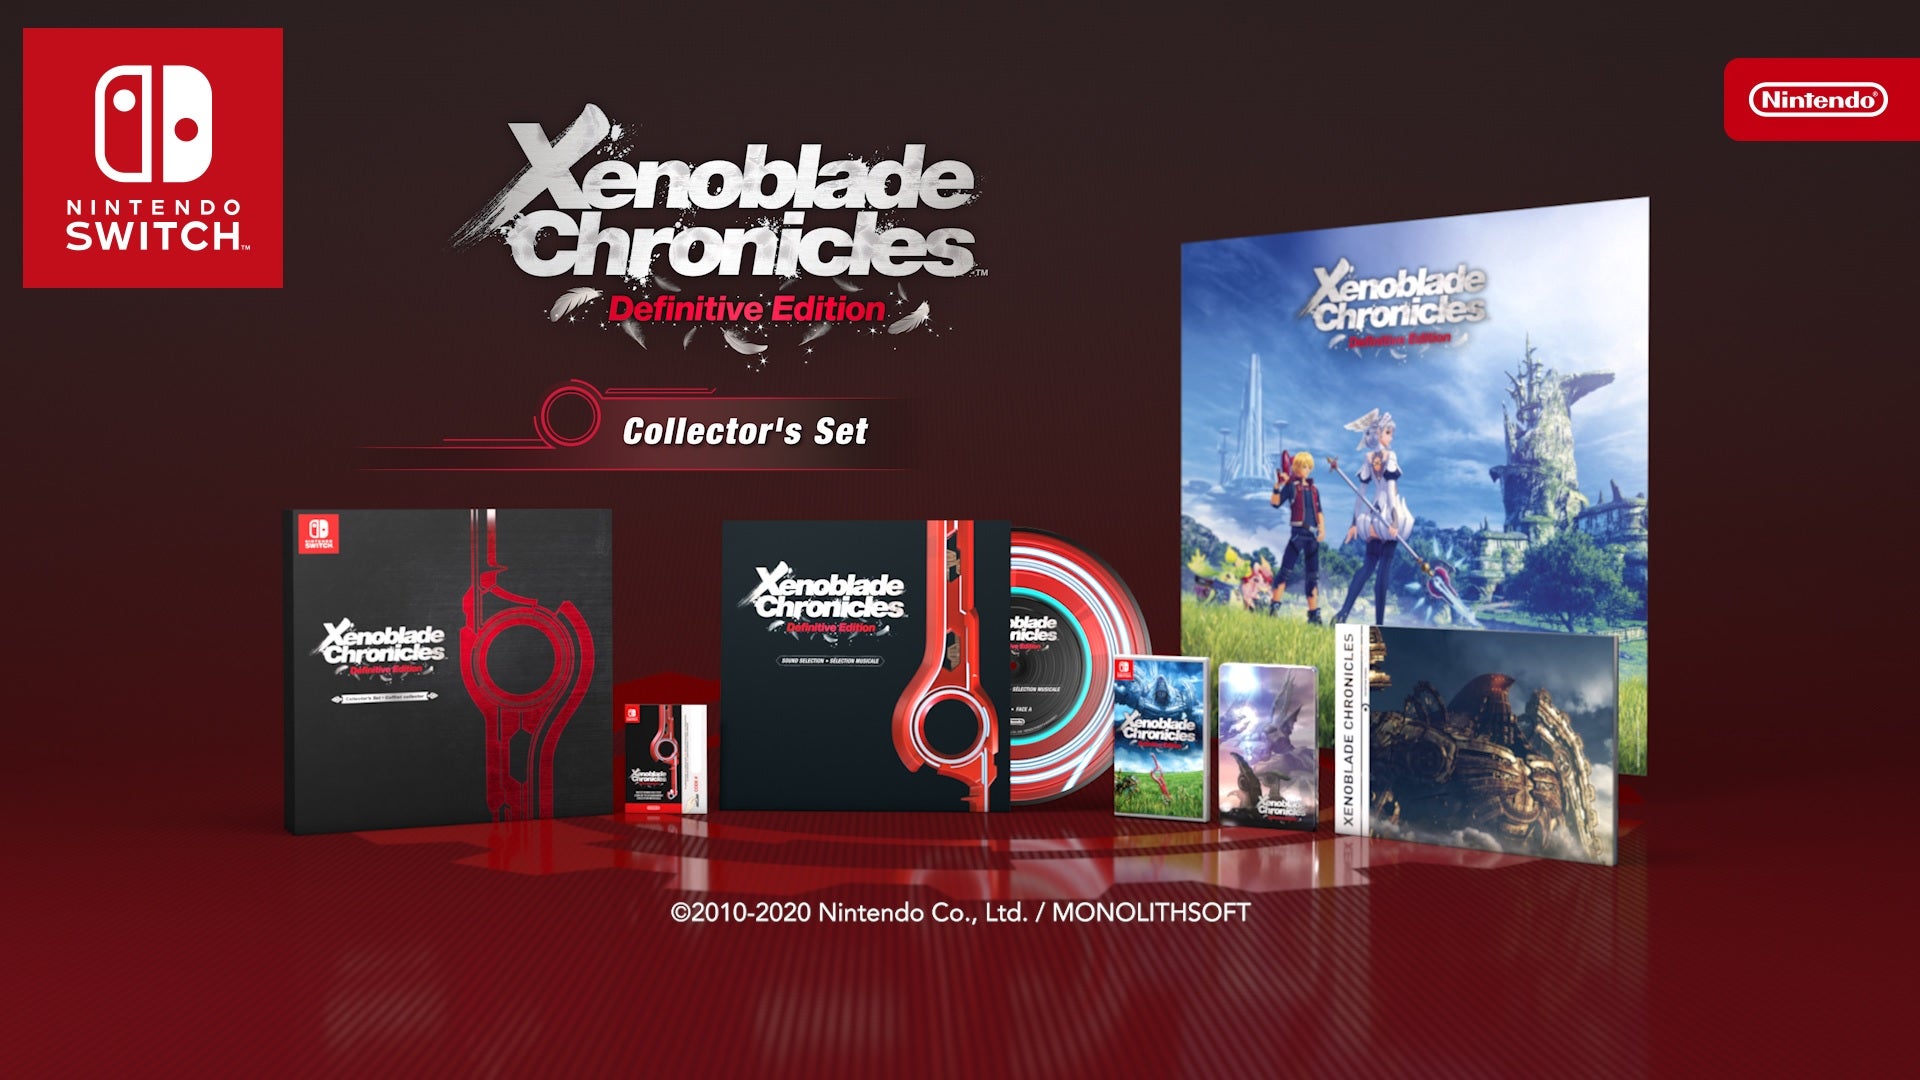 Here's where you can get the Xenoblade Chronicles: Definitive ...